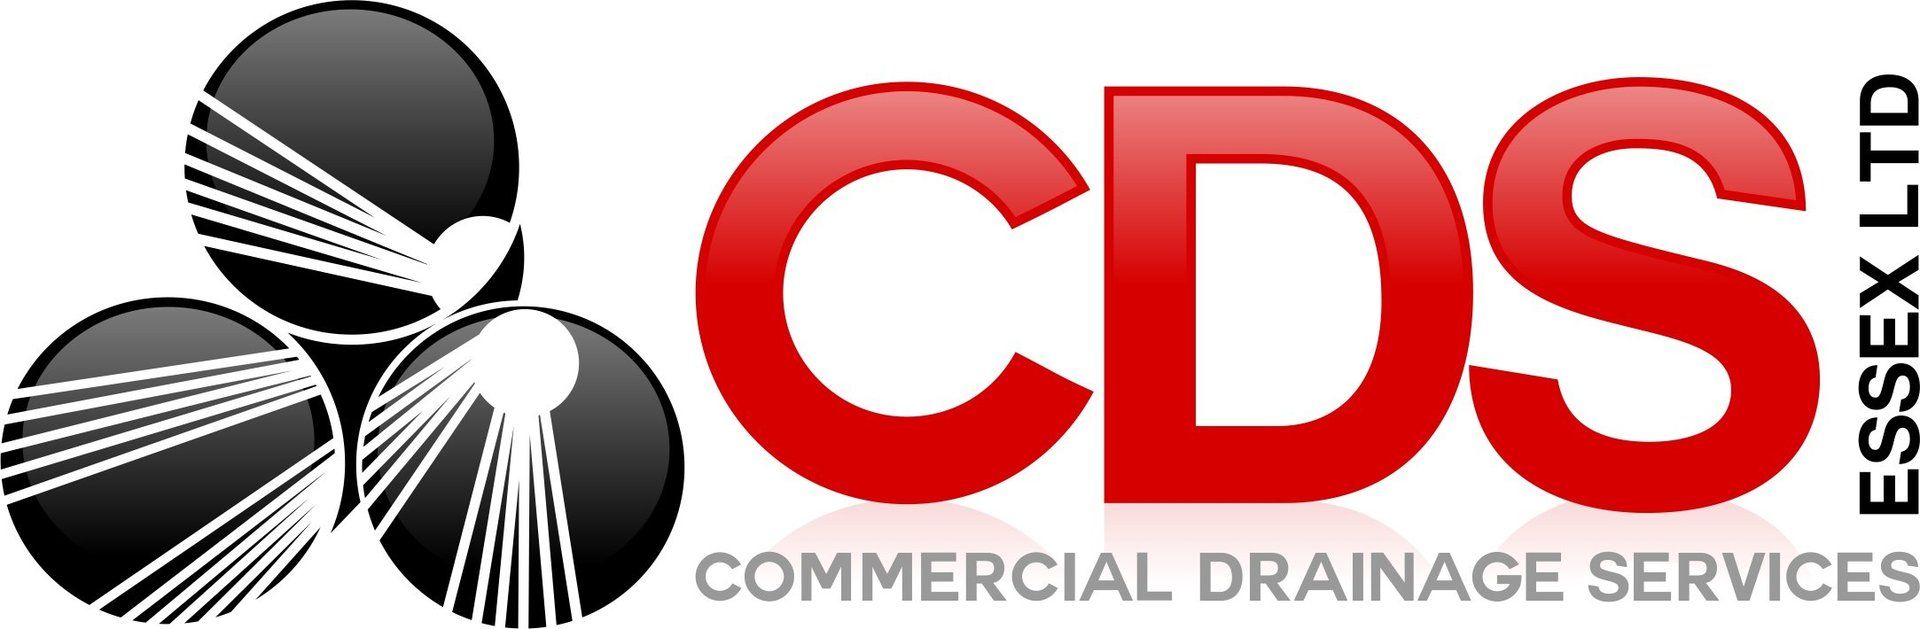 Commercial Drainage Services Ltd expert commercial drainage company